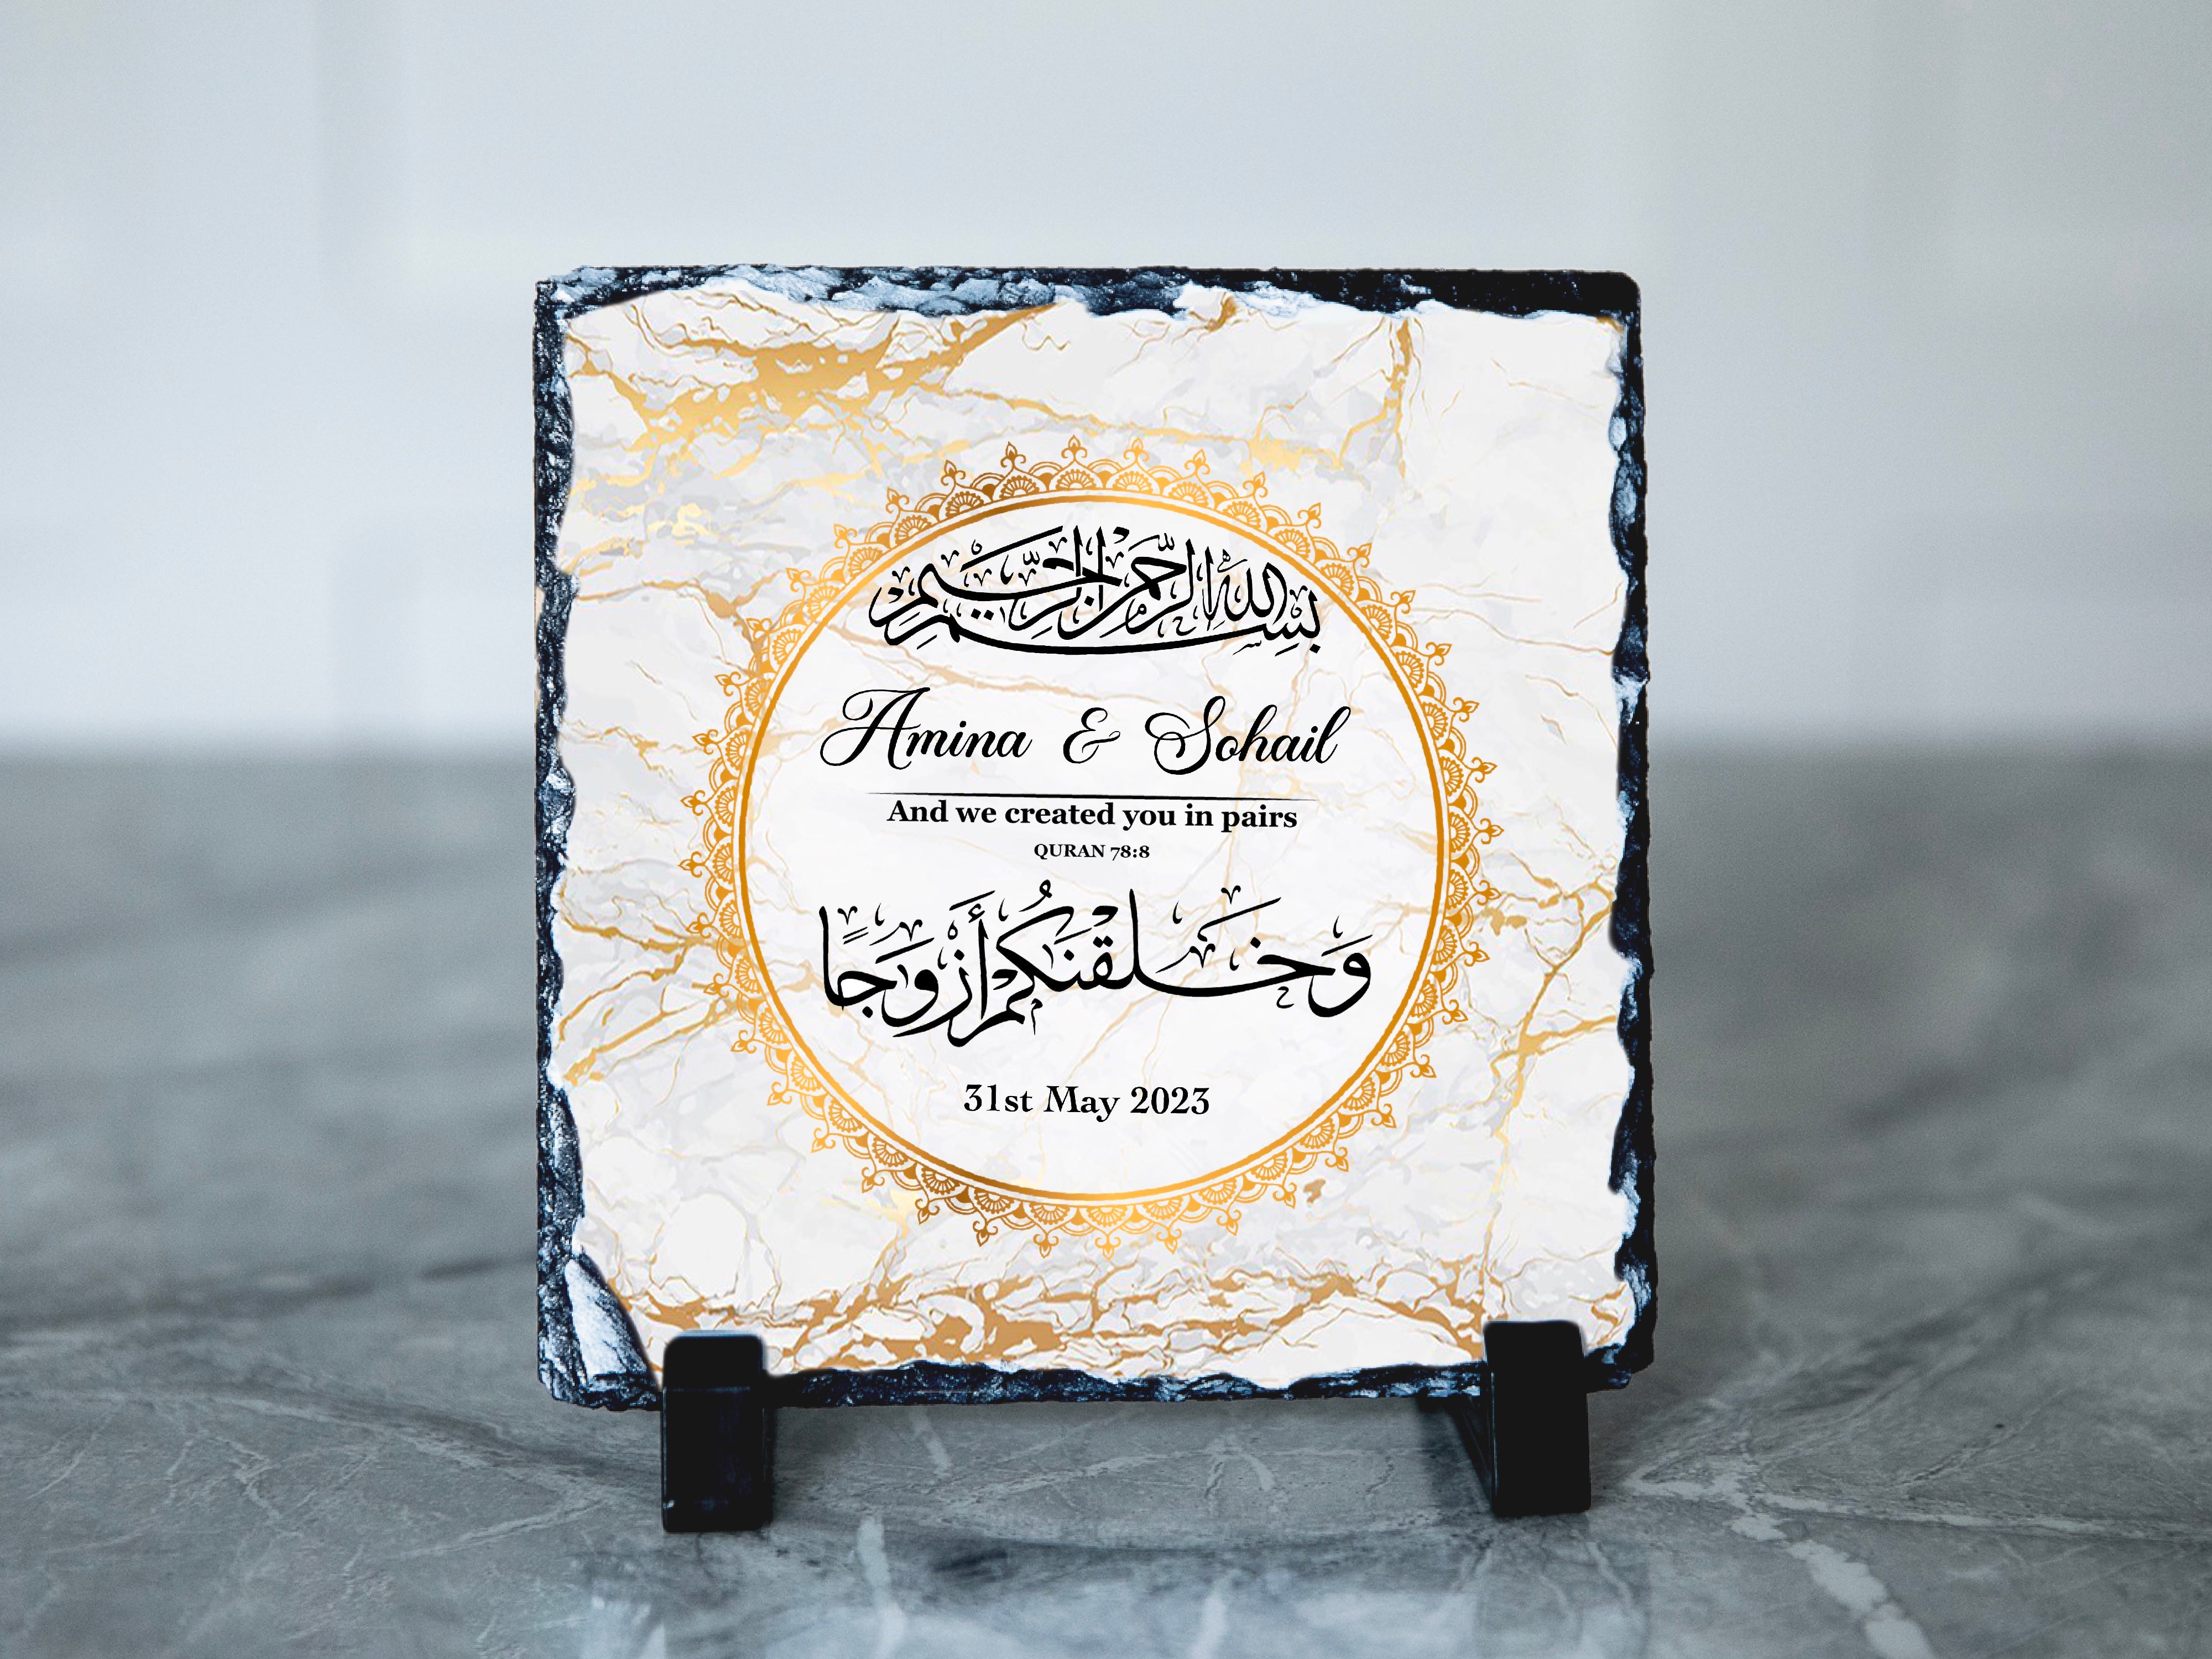 Amazon.com: Pack of 10 Personalized Ayatul Kursi Islamic Party Favors Gifts,  Ayatul Kursi Muslim Wedding Gifts Engraved on a Gold Acrylic Backed with  Clear Plexiglass (Wooden Stand Included) : Handmade Products